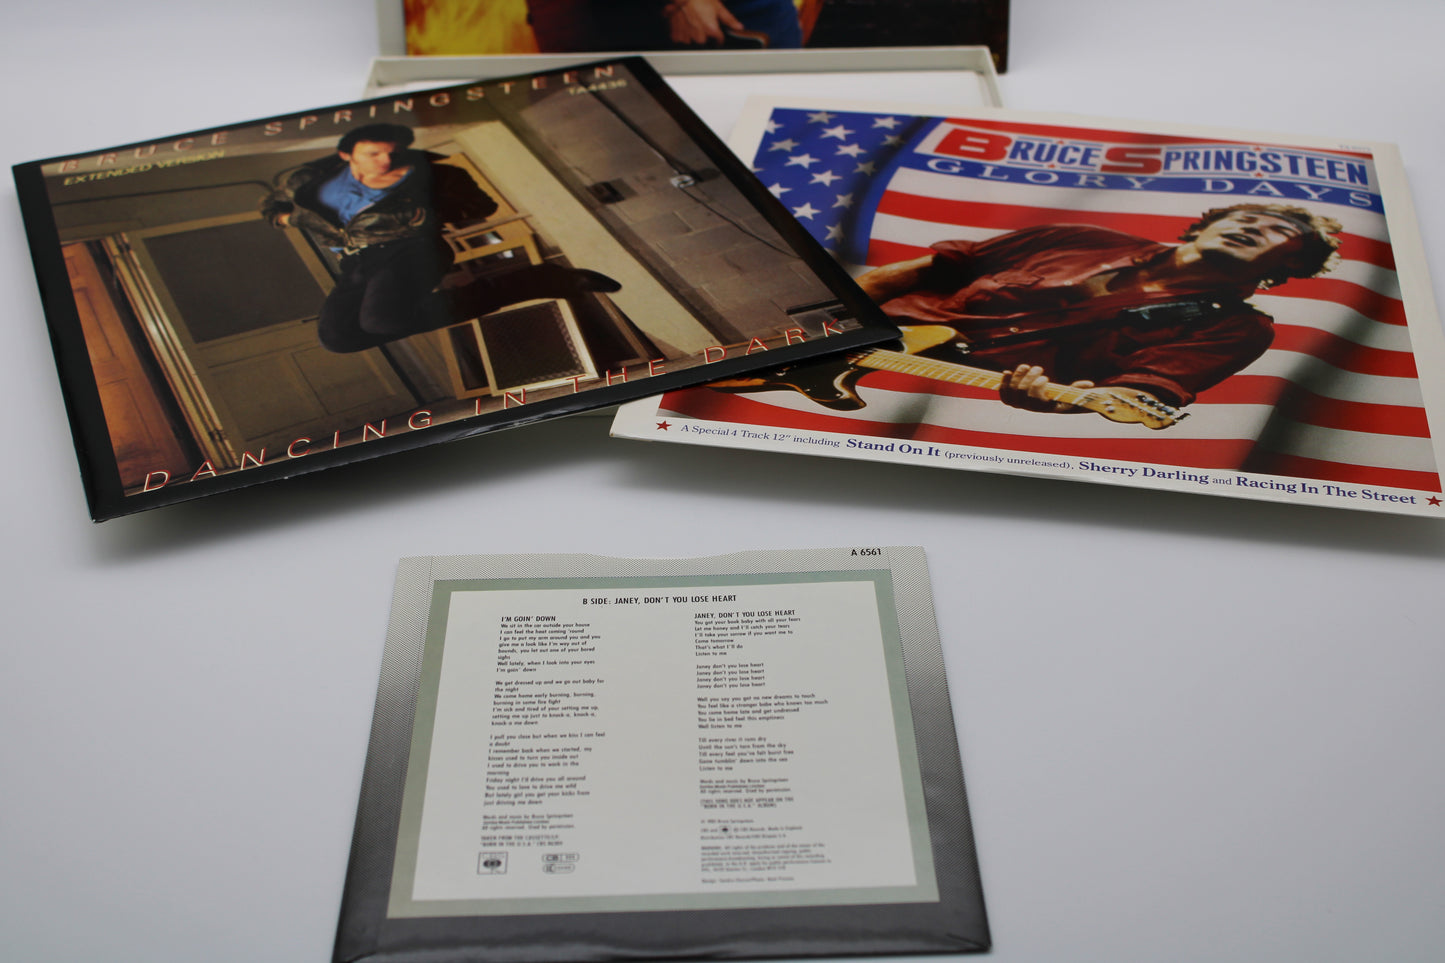 The Born In The U.S.A. 12" Single Collection - Four 12" Vinyl, One 45 Record + Poster 1985 Original Box Set